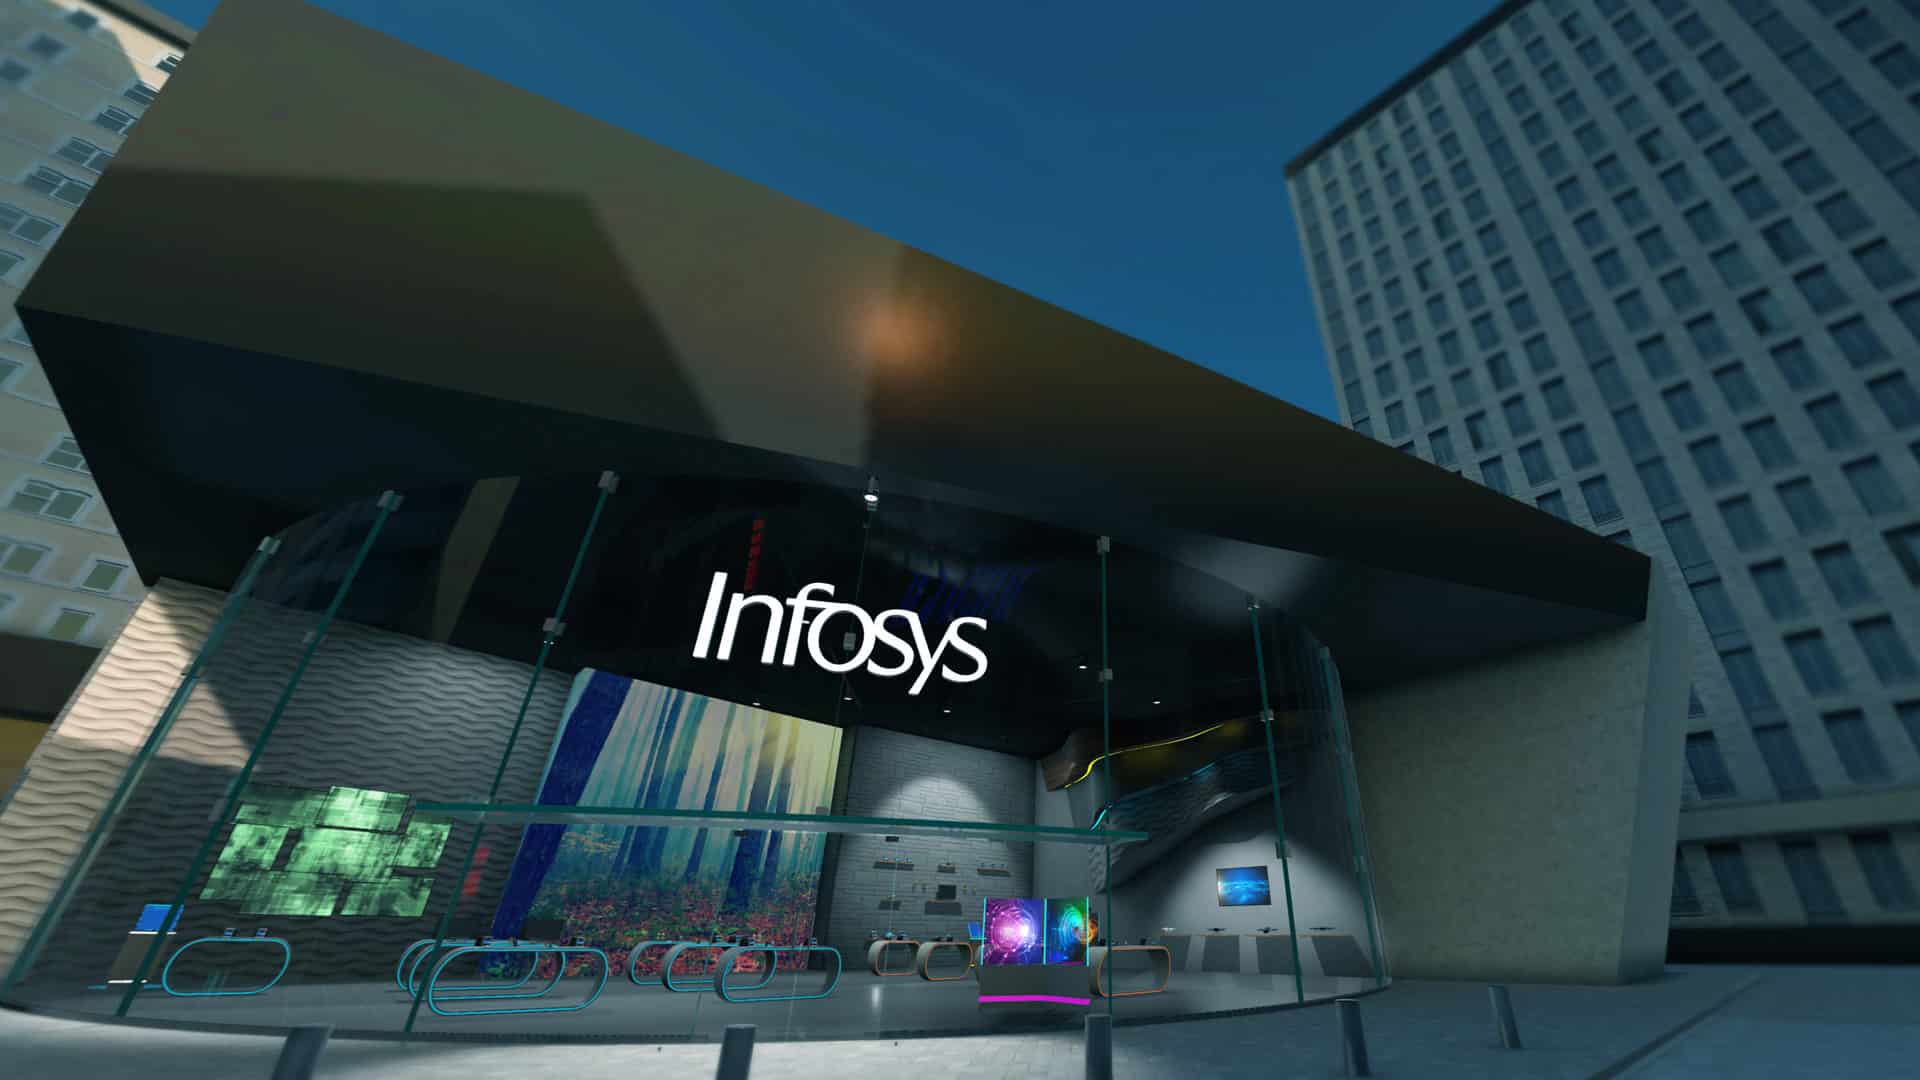 Infosys soars to 52-week high on Q1 beat, guidance upgrade